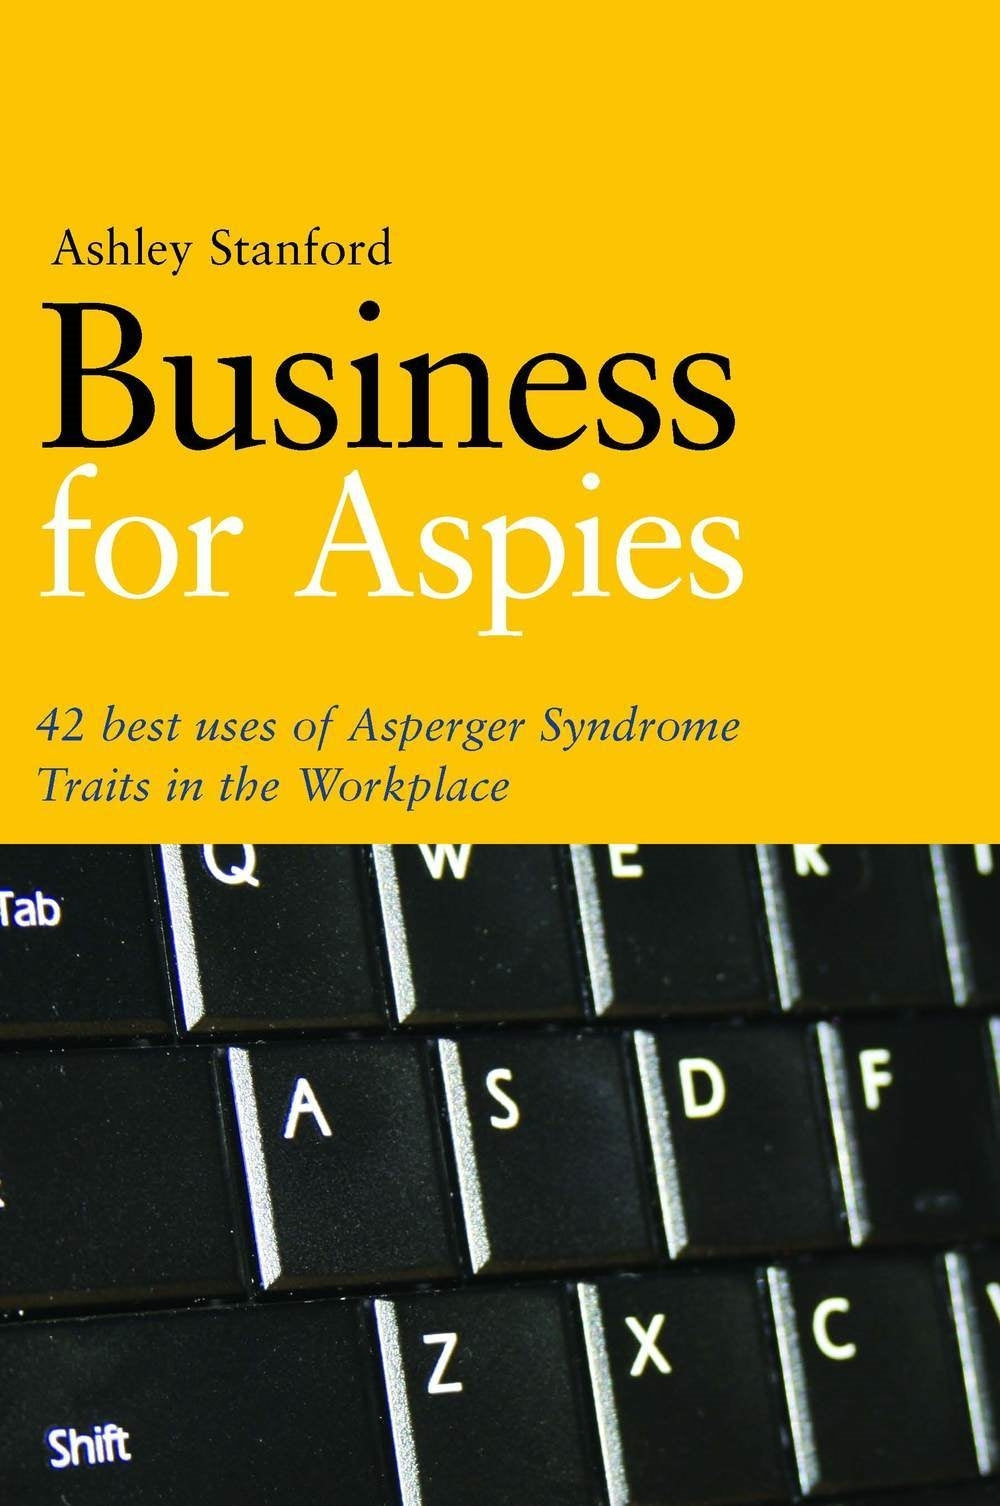 Business for Aspies by Ashley Stanford